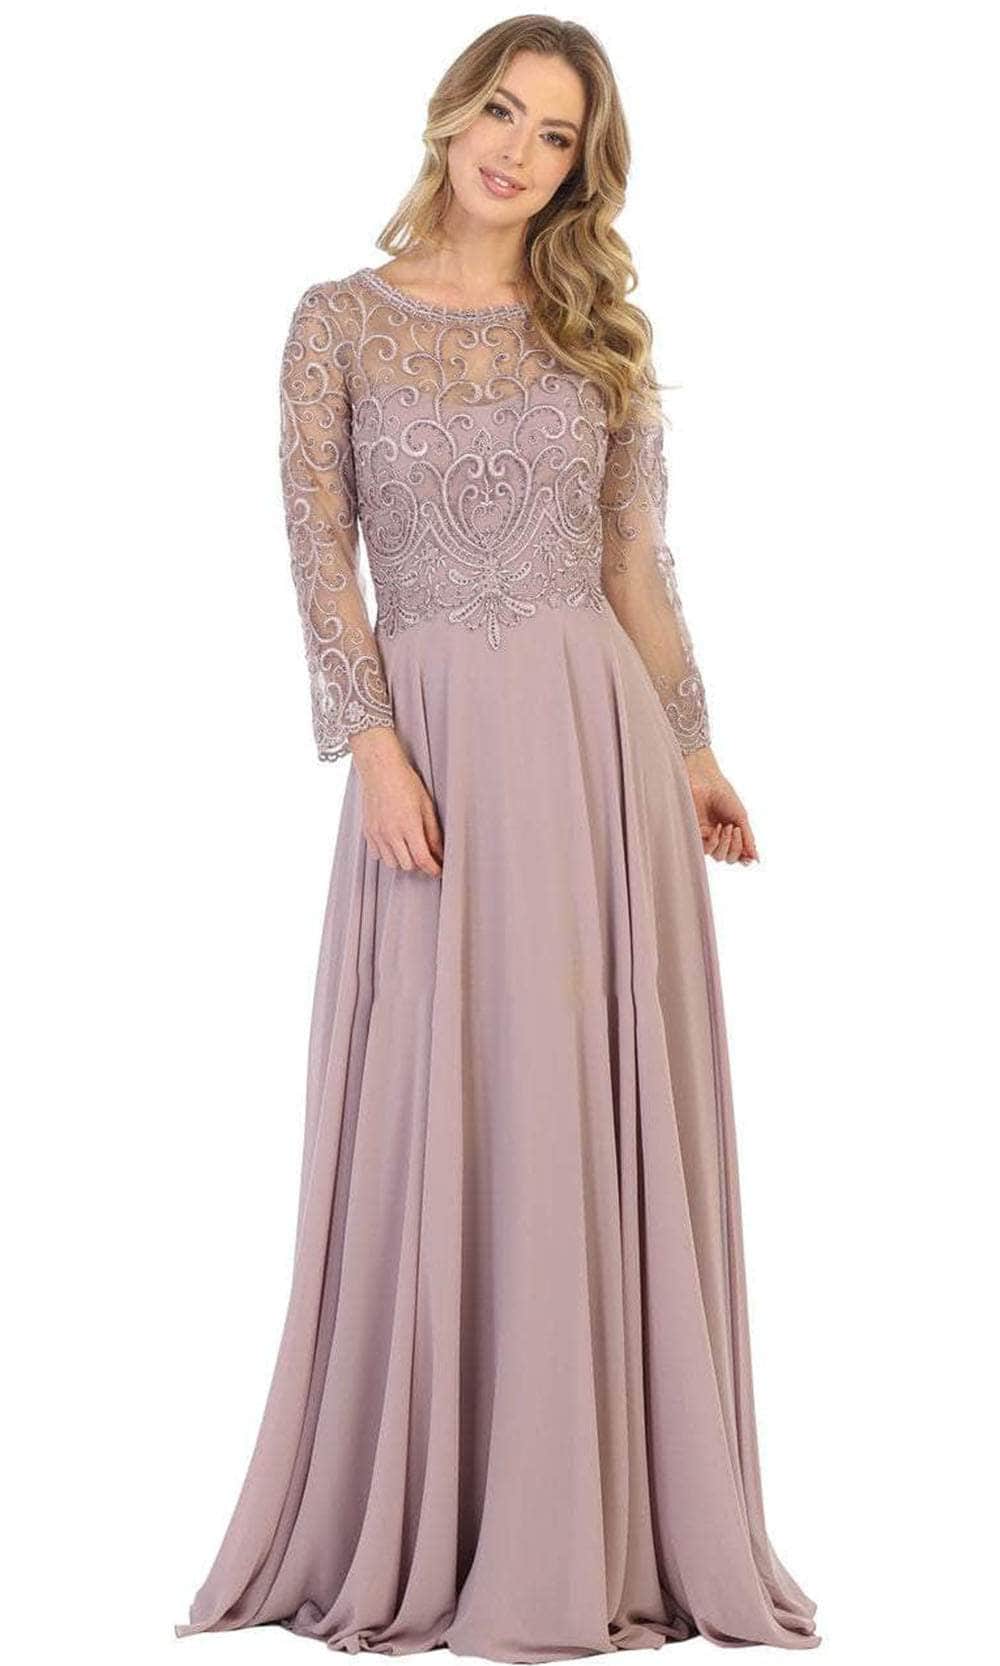 May Queen MQ1706 - Quarter Sleeve Beaded Lace Formal Gown
